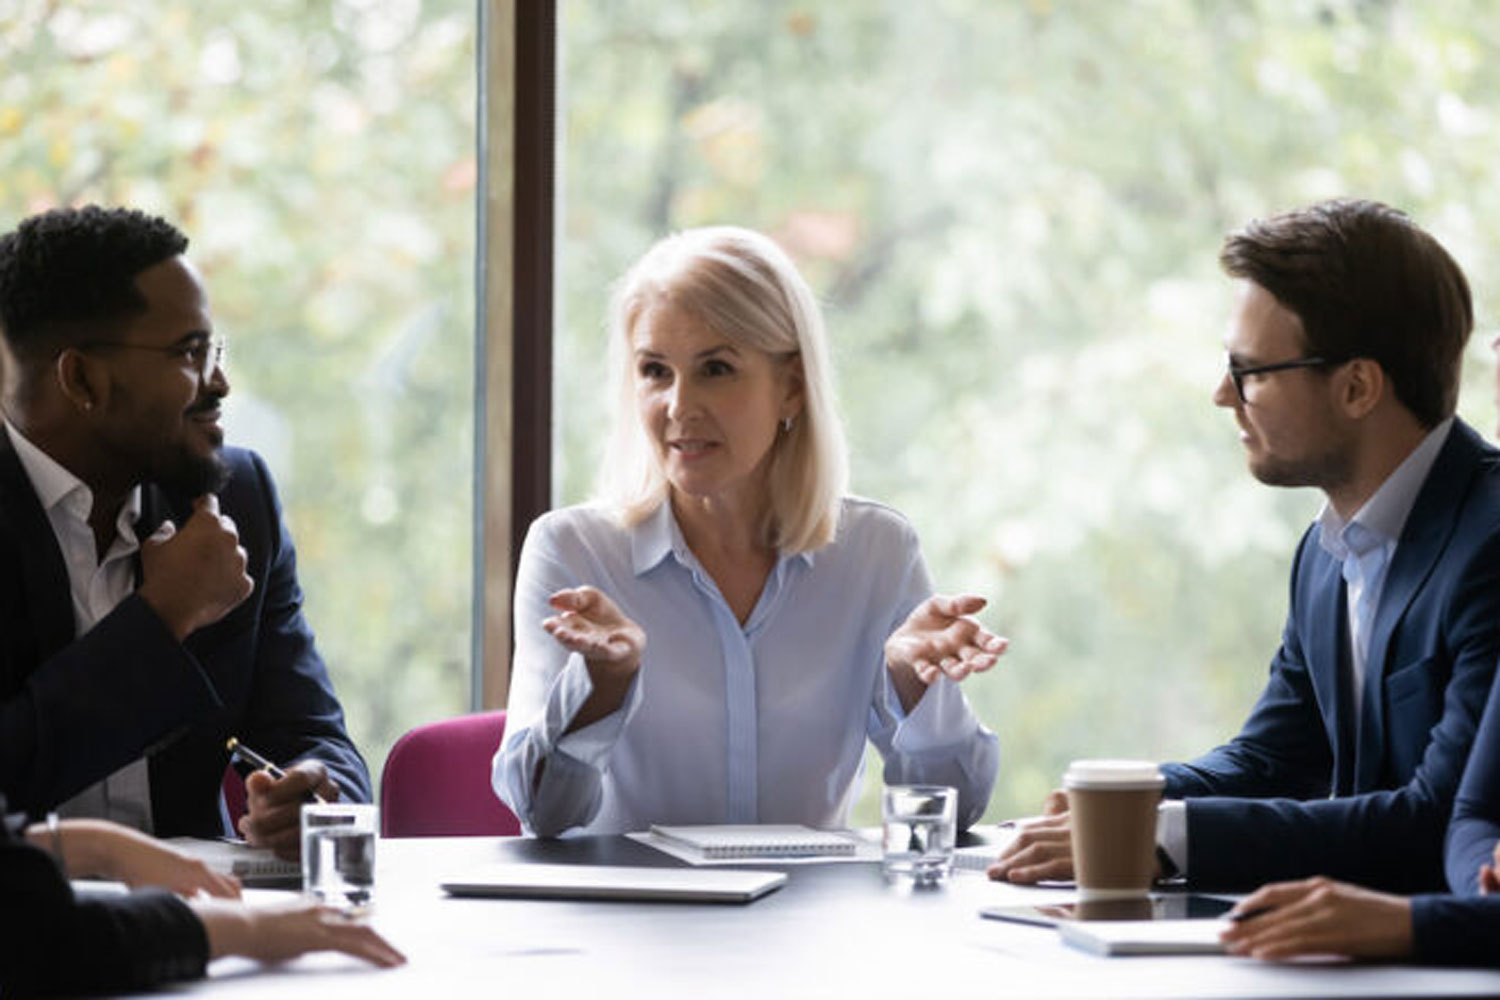 Three people at conference table